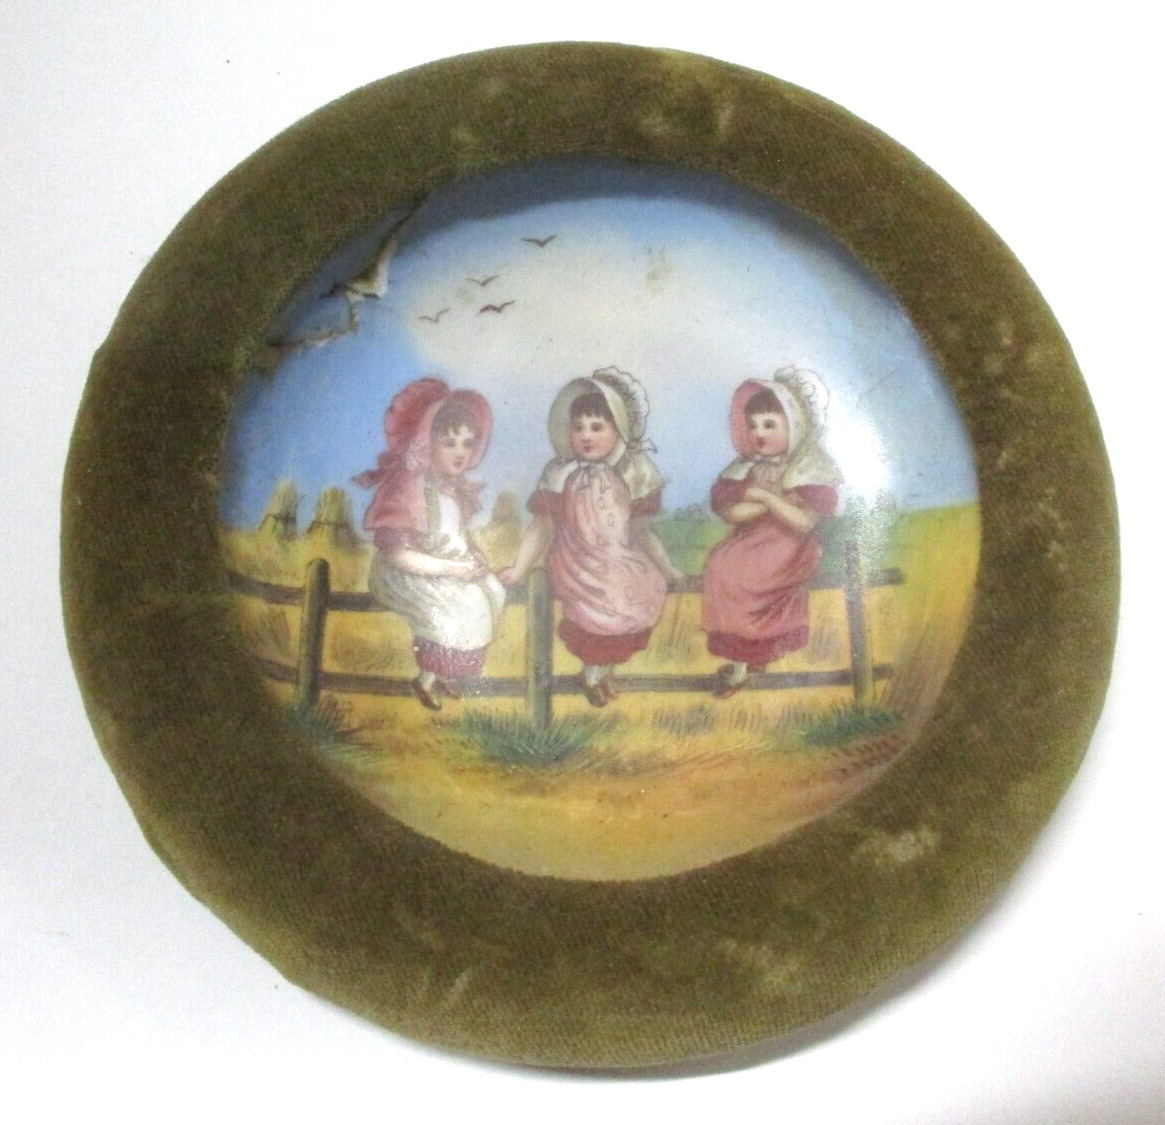 Small Antique Hand Painted Plate ... 3 Young Girls Sitting on a Fence